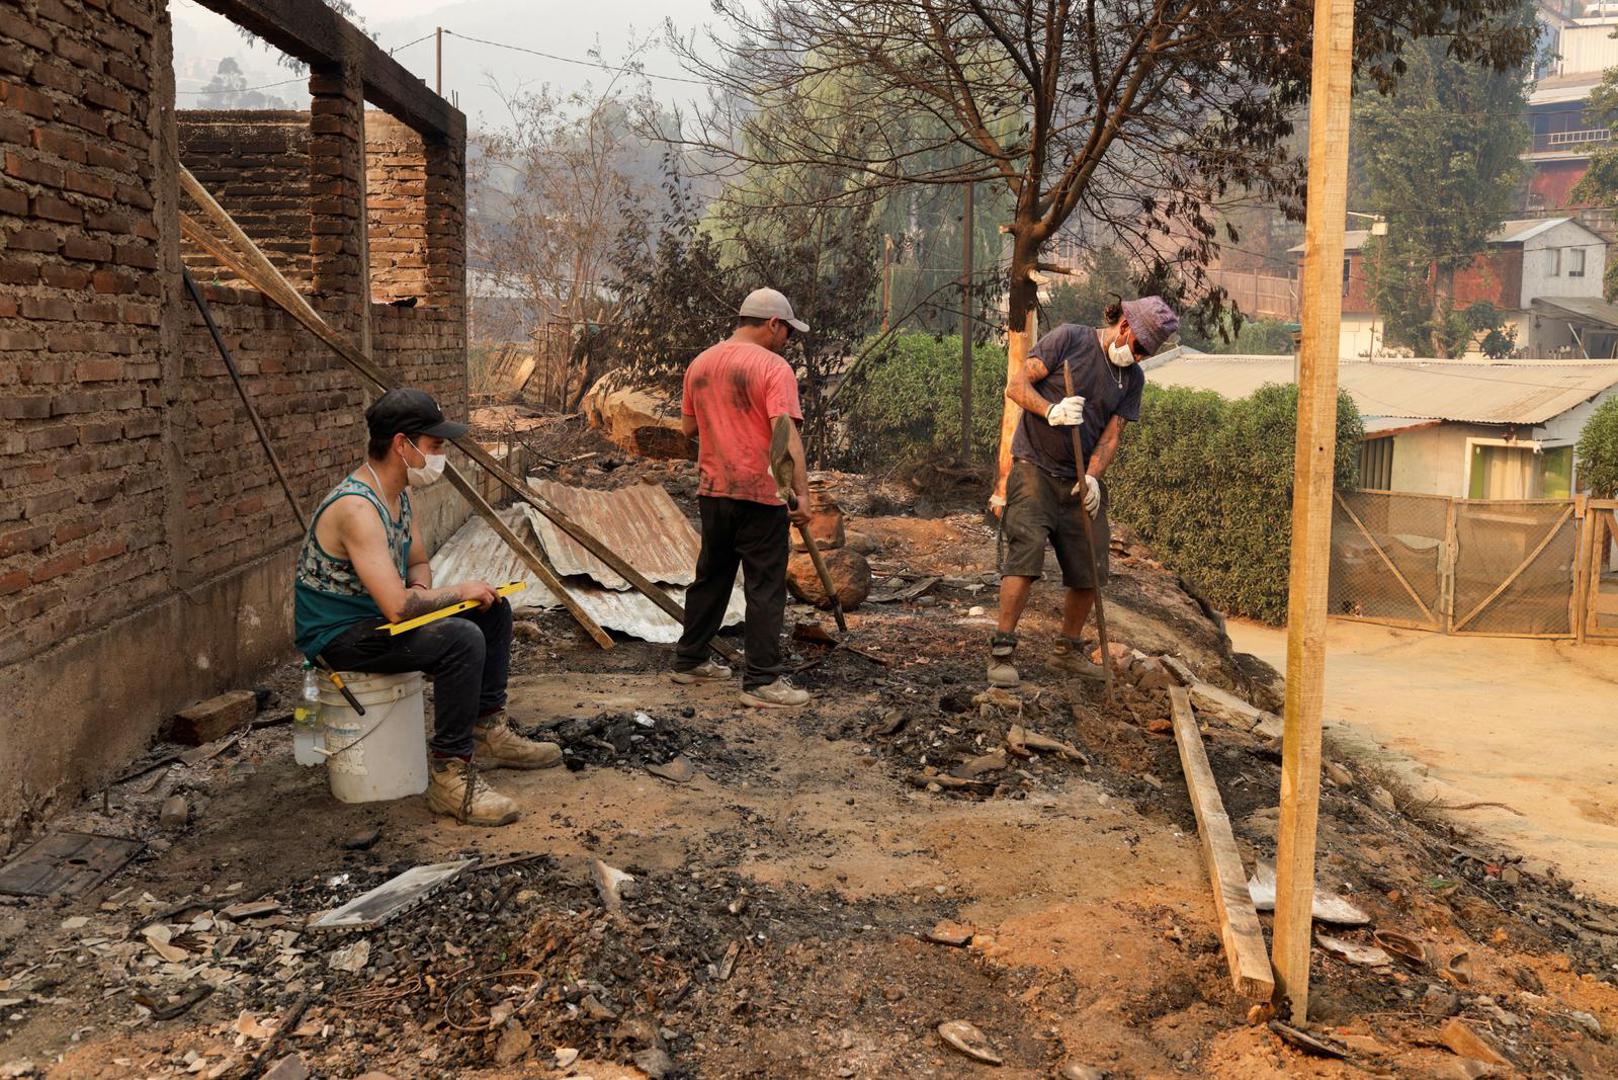 People work amongst the remains of burnt houses following the spread of wildfires in Vina del Mar, Chile February 3, 2024. REUTERS/Sofia Yanjari Photo: SOFIA YANJARI/REUTERS